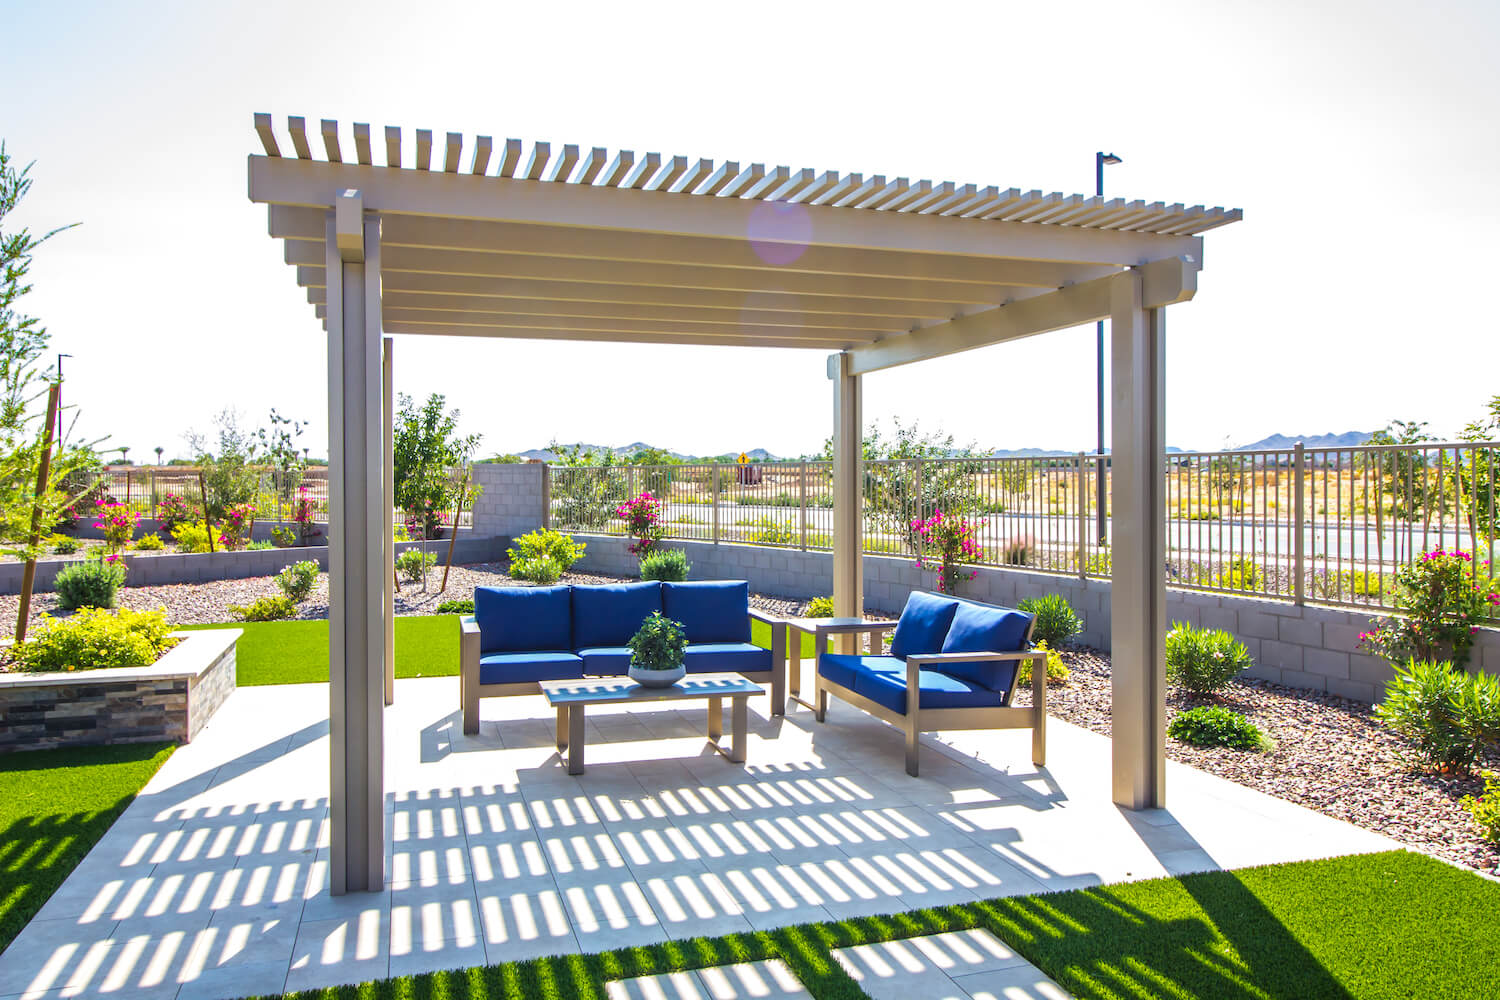 How your dream pergola or pavilion can take your outdoor space to the next level design pool